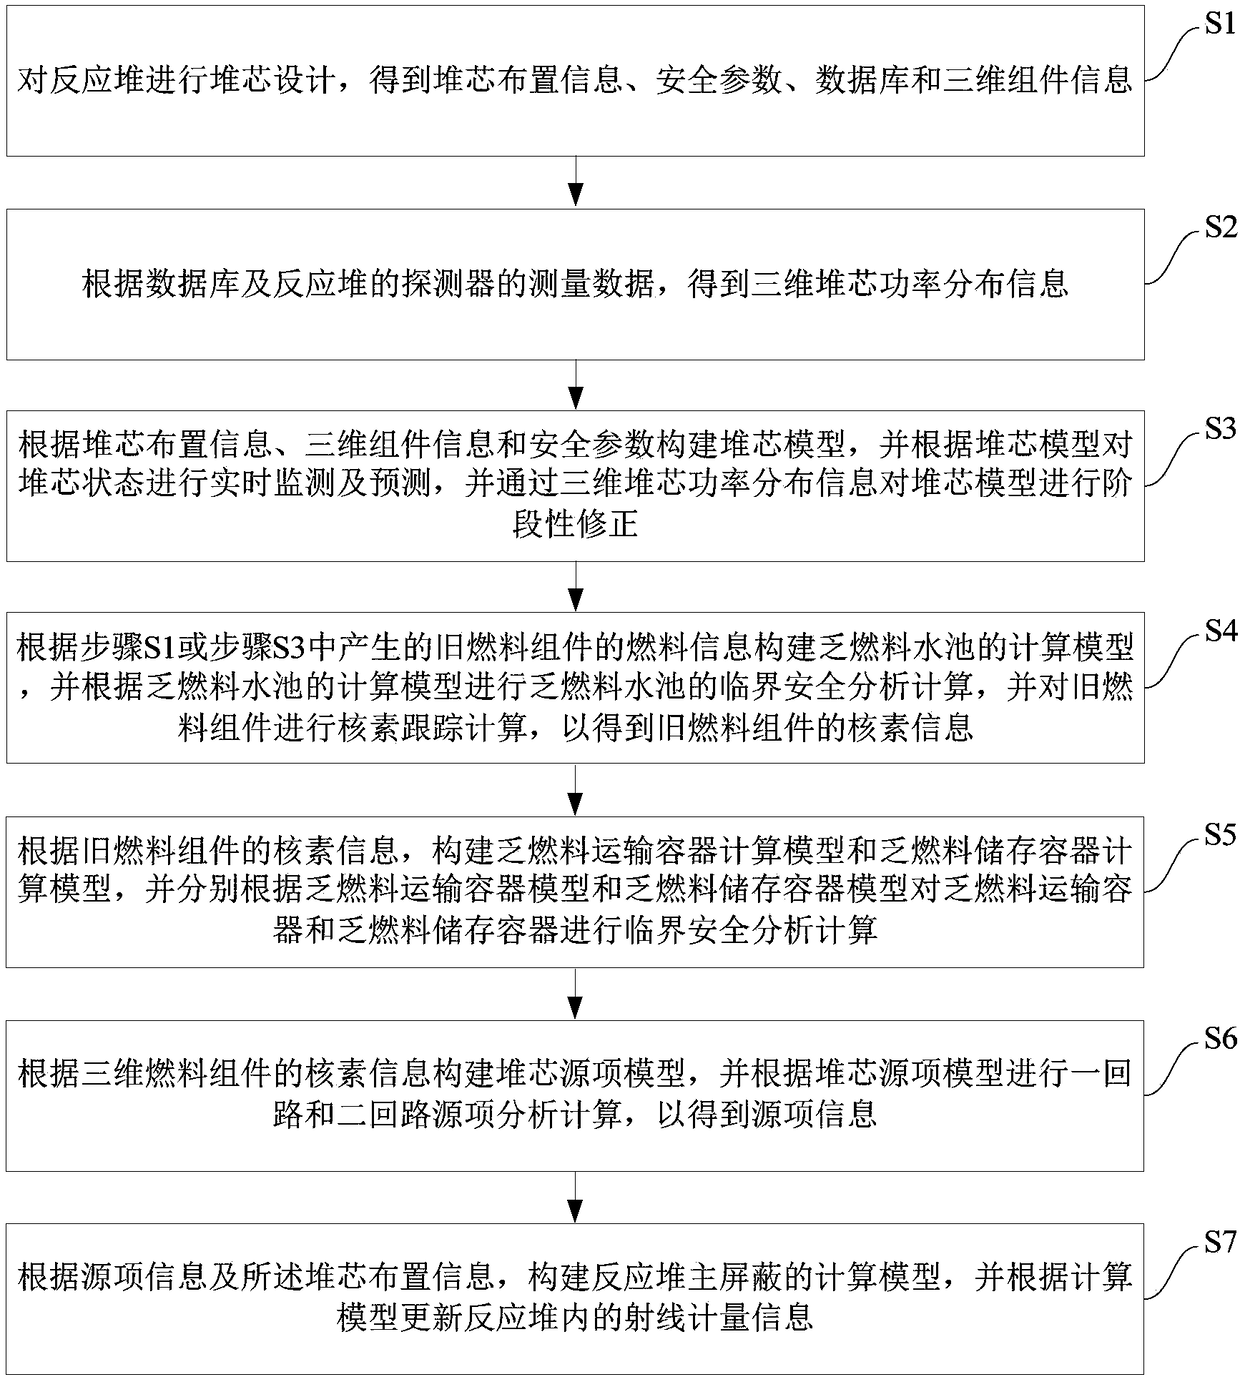 Nuclear power plant design and operation support method and system